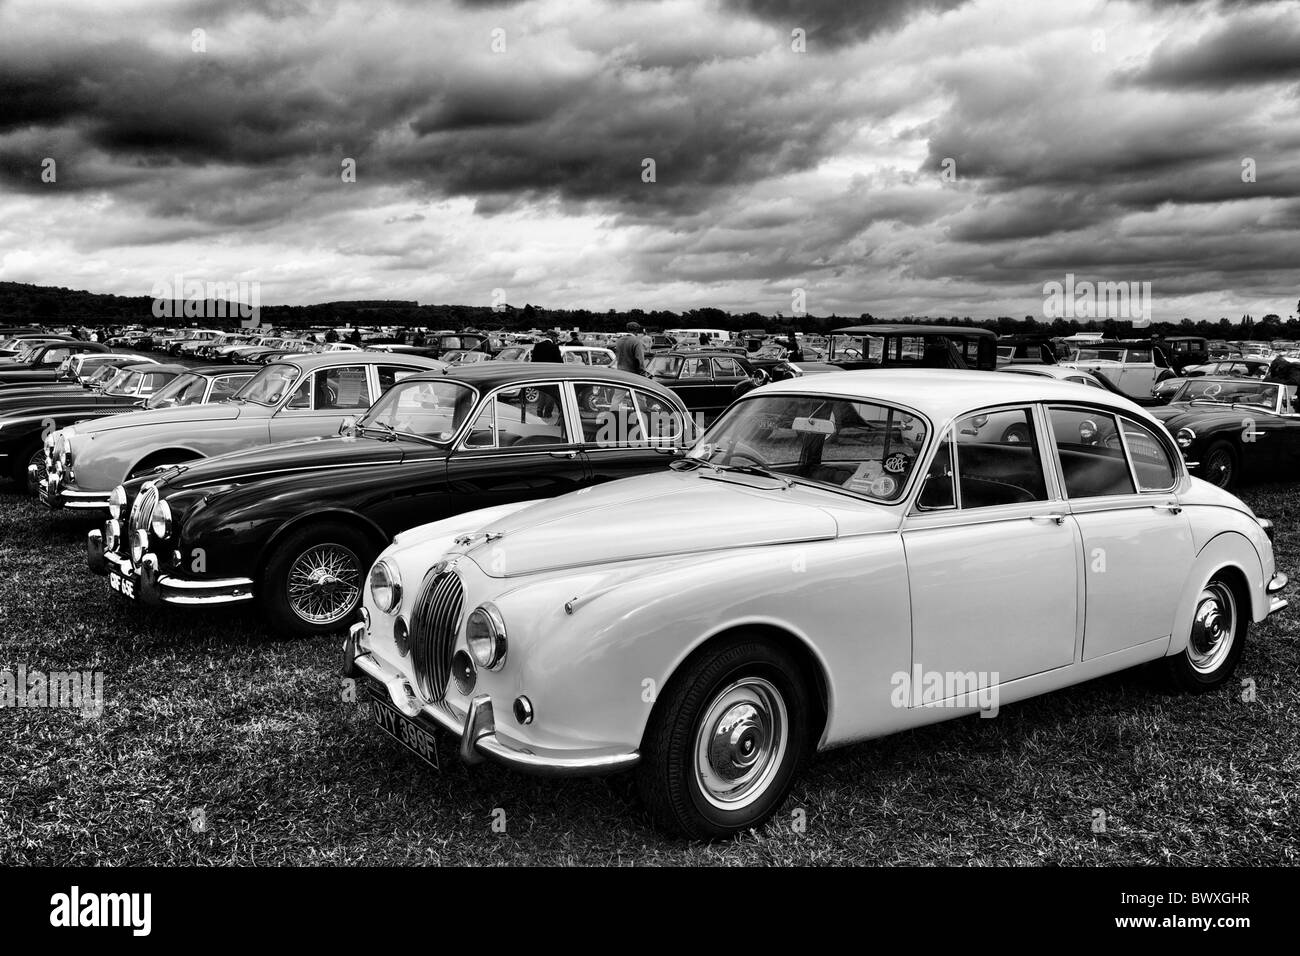 Jaguars parked in the 'Classics' car park at the 2010 Goodwood Revival, Sussex, England, UK. Stock Photo